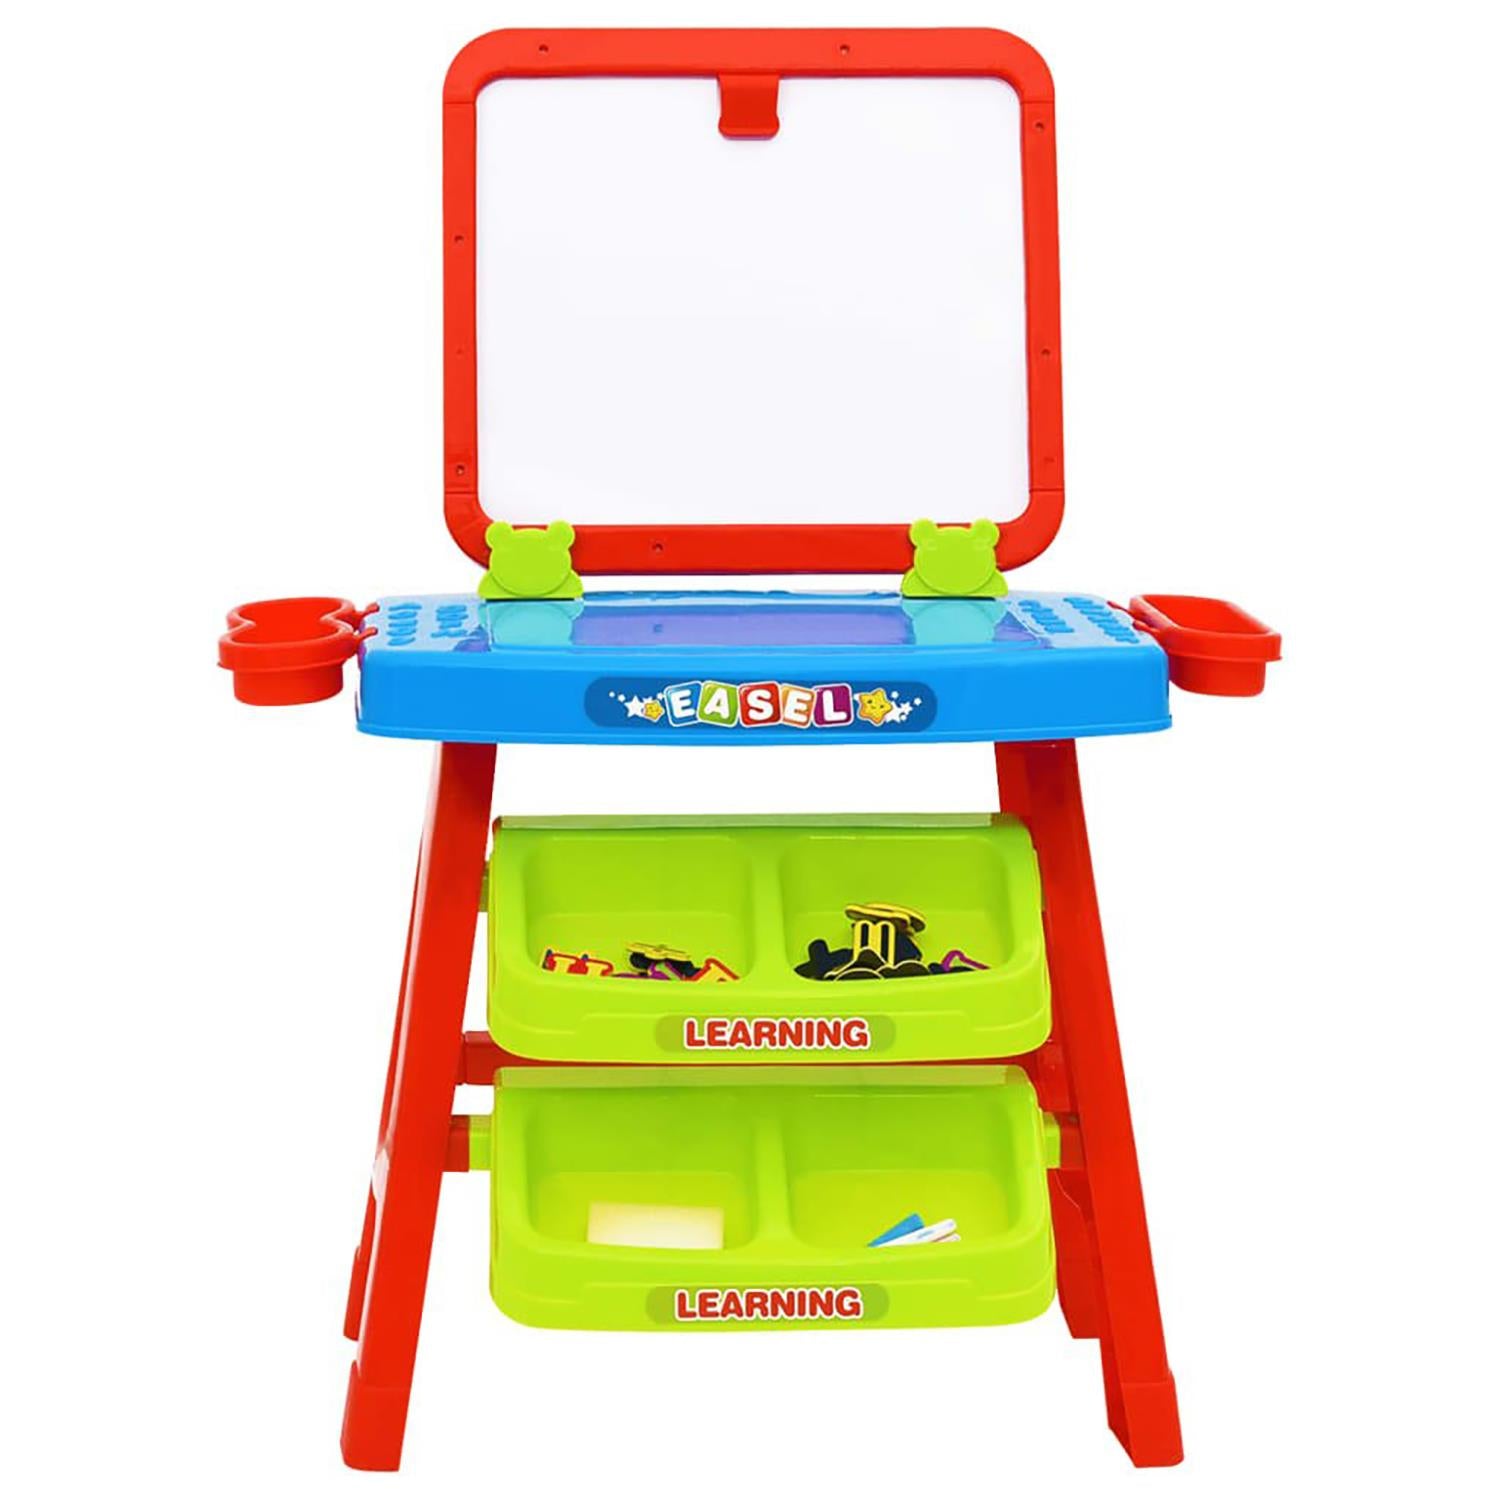 Learning Desk & Magnetic Easel Chalkboard by The Magic Toy Shop - The Magic Toy Shop